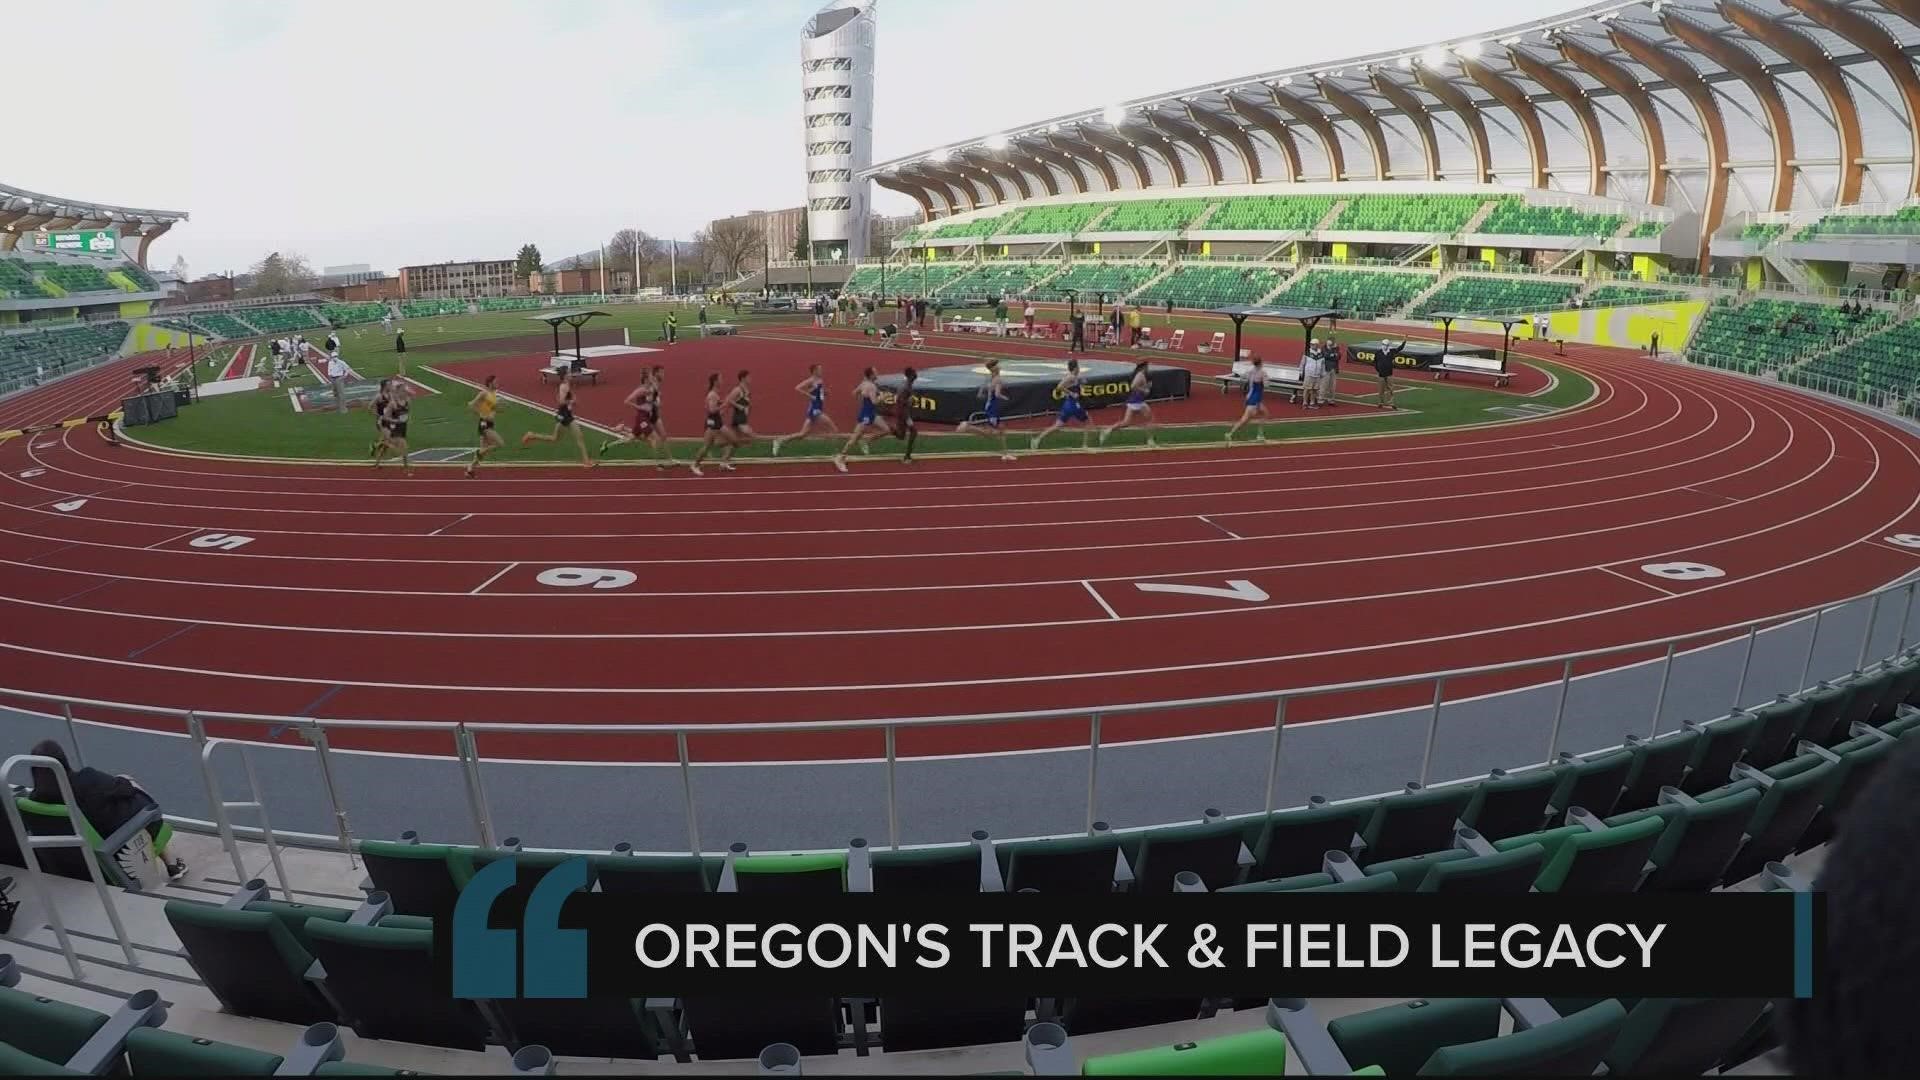 Oregon is the place to be for elite track and field athletes. Devon Haskins looked into the history of the sport and its special connection to the state.